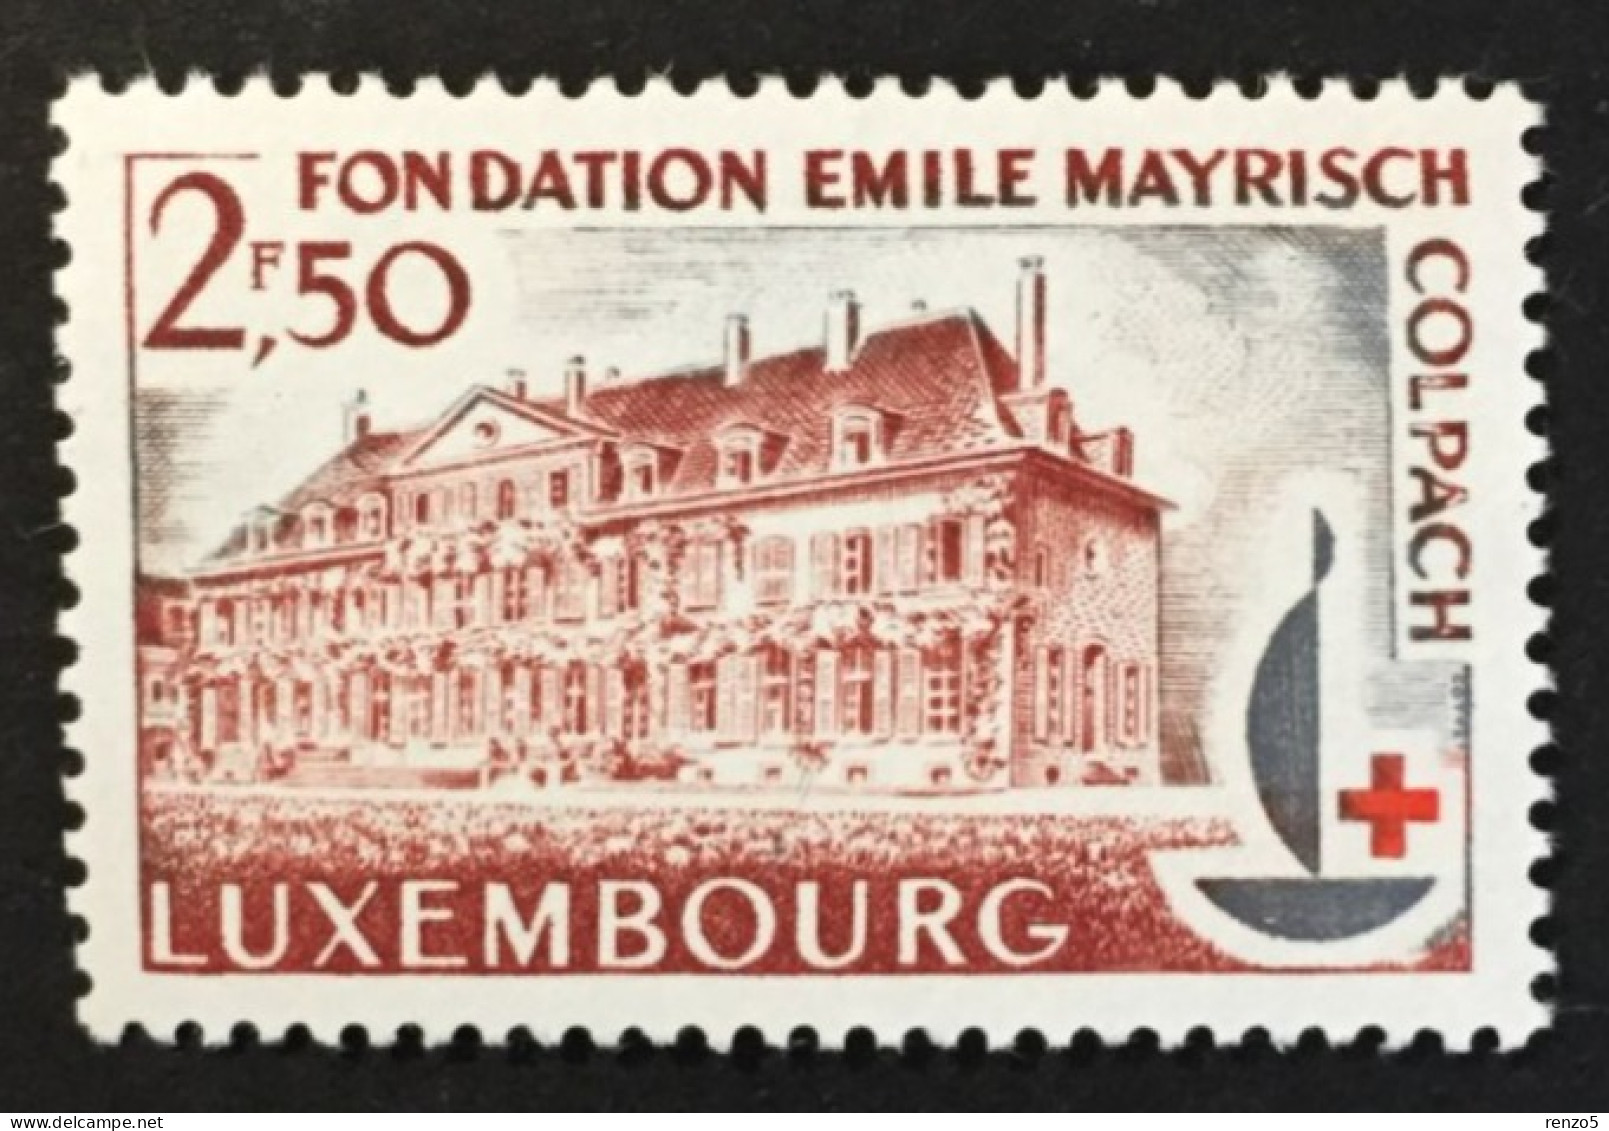 1963 Luxembourg - Colpach Castle And The Centenary Emblem Red Cross - Unused ( Imperfect Gum ) - Unused Stamps